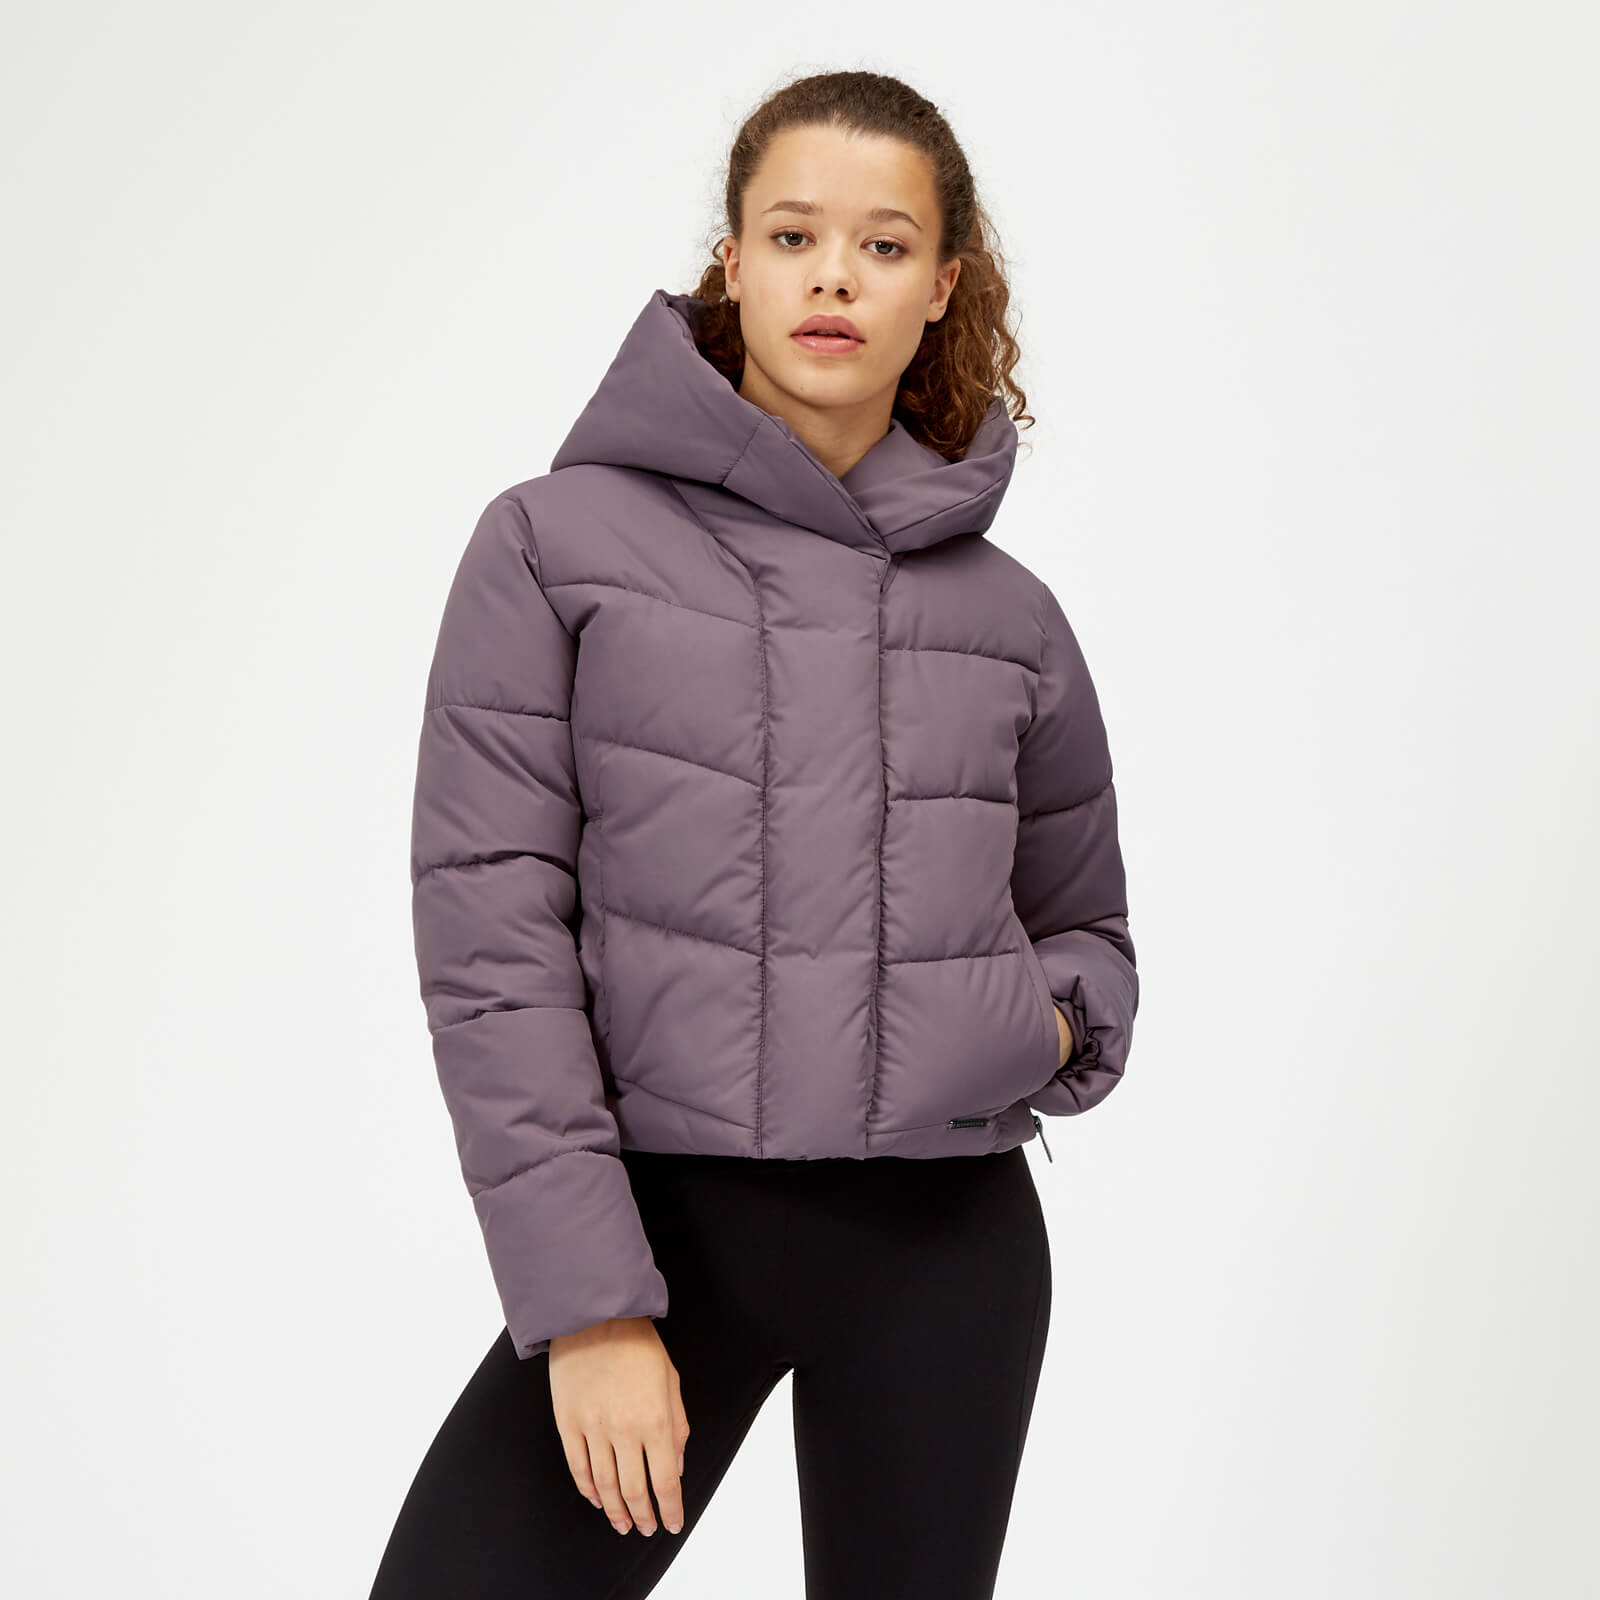 Myprotein Pro Tech Protect Puffer Jacket - Mauve - XS